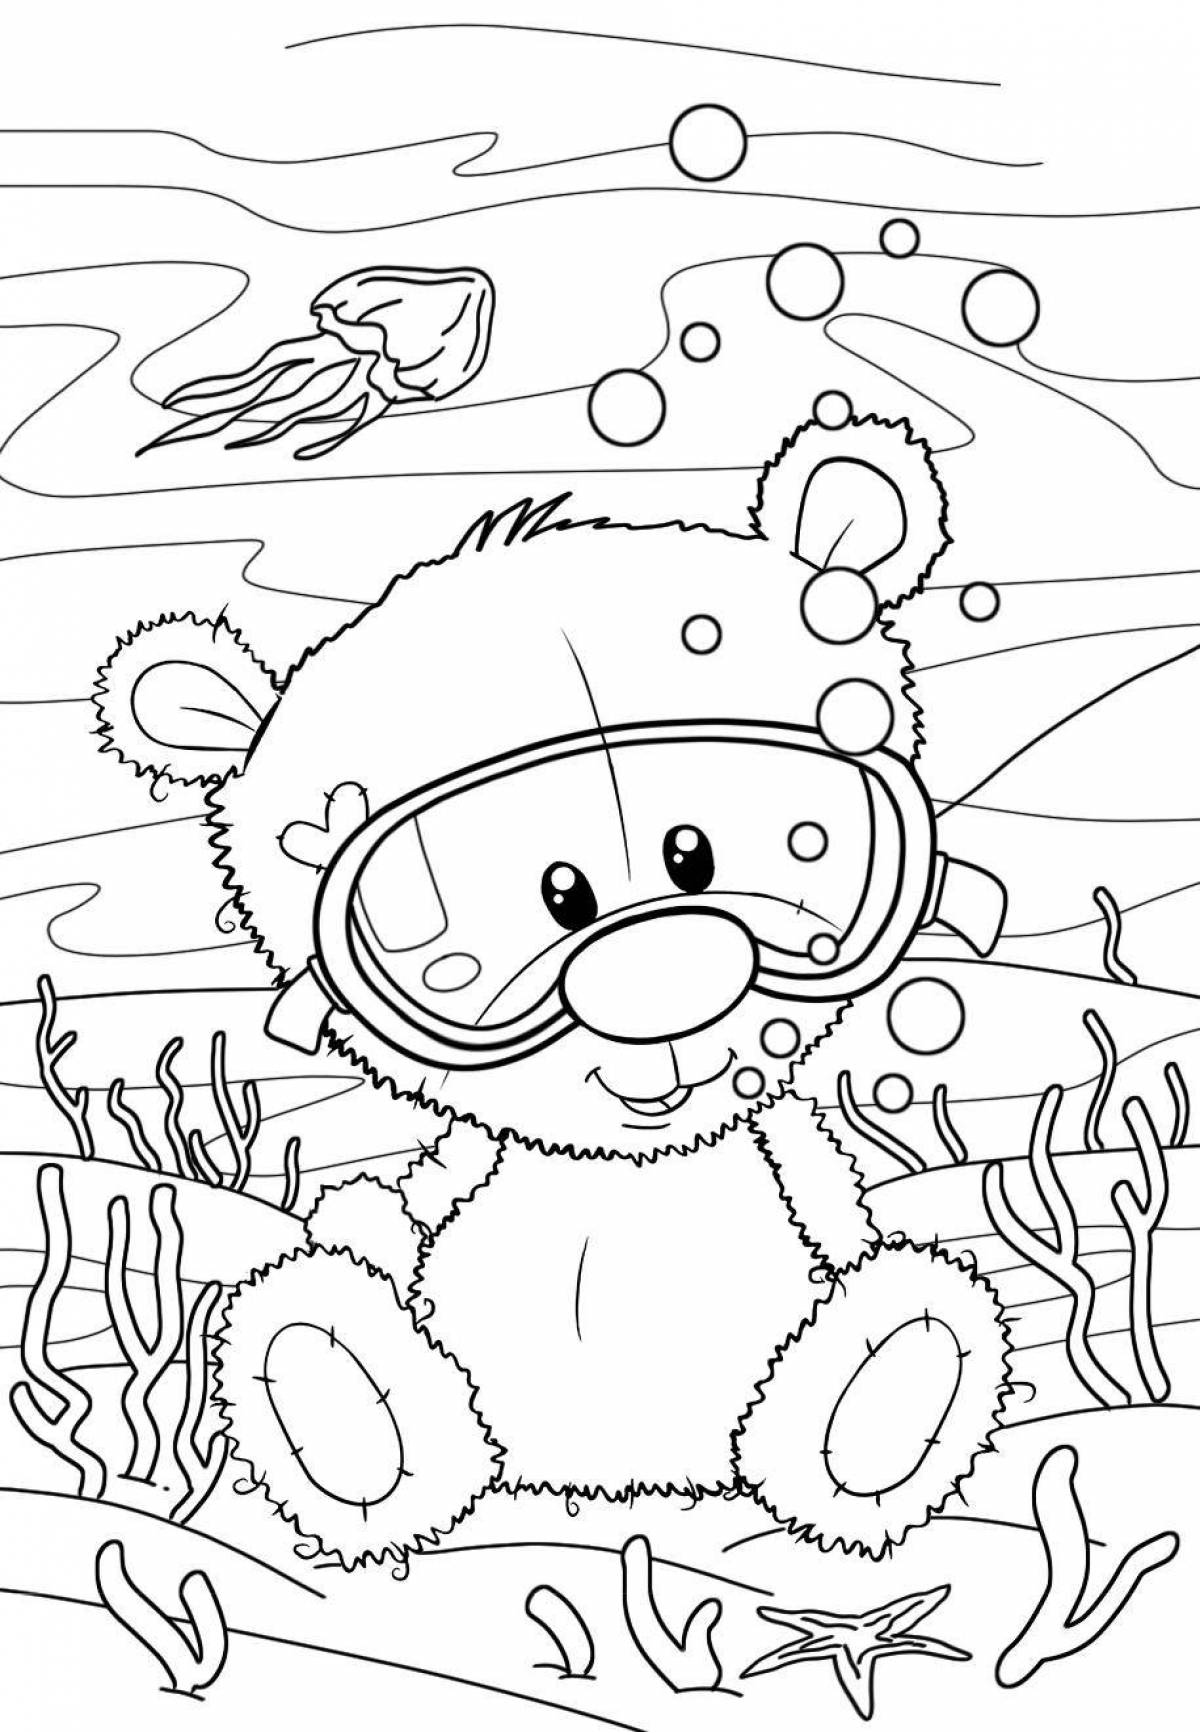 Snuggly teddy coloring page